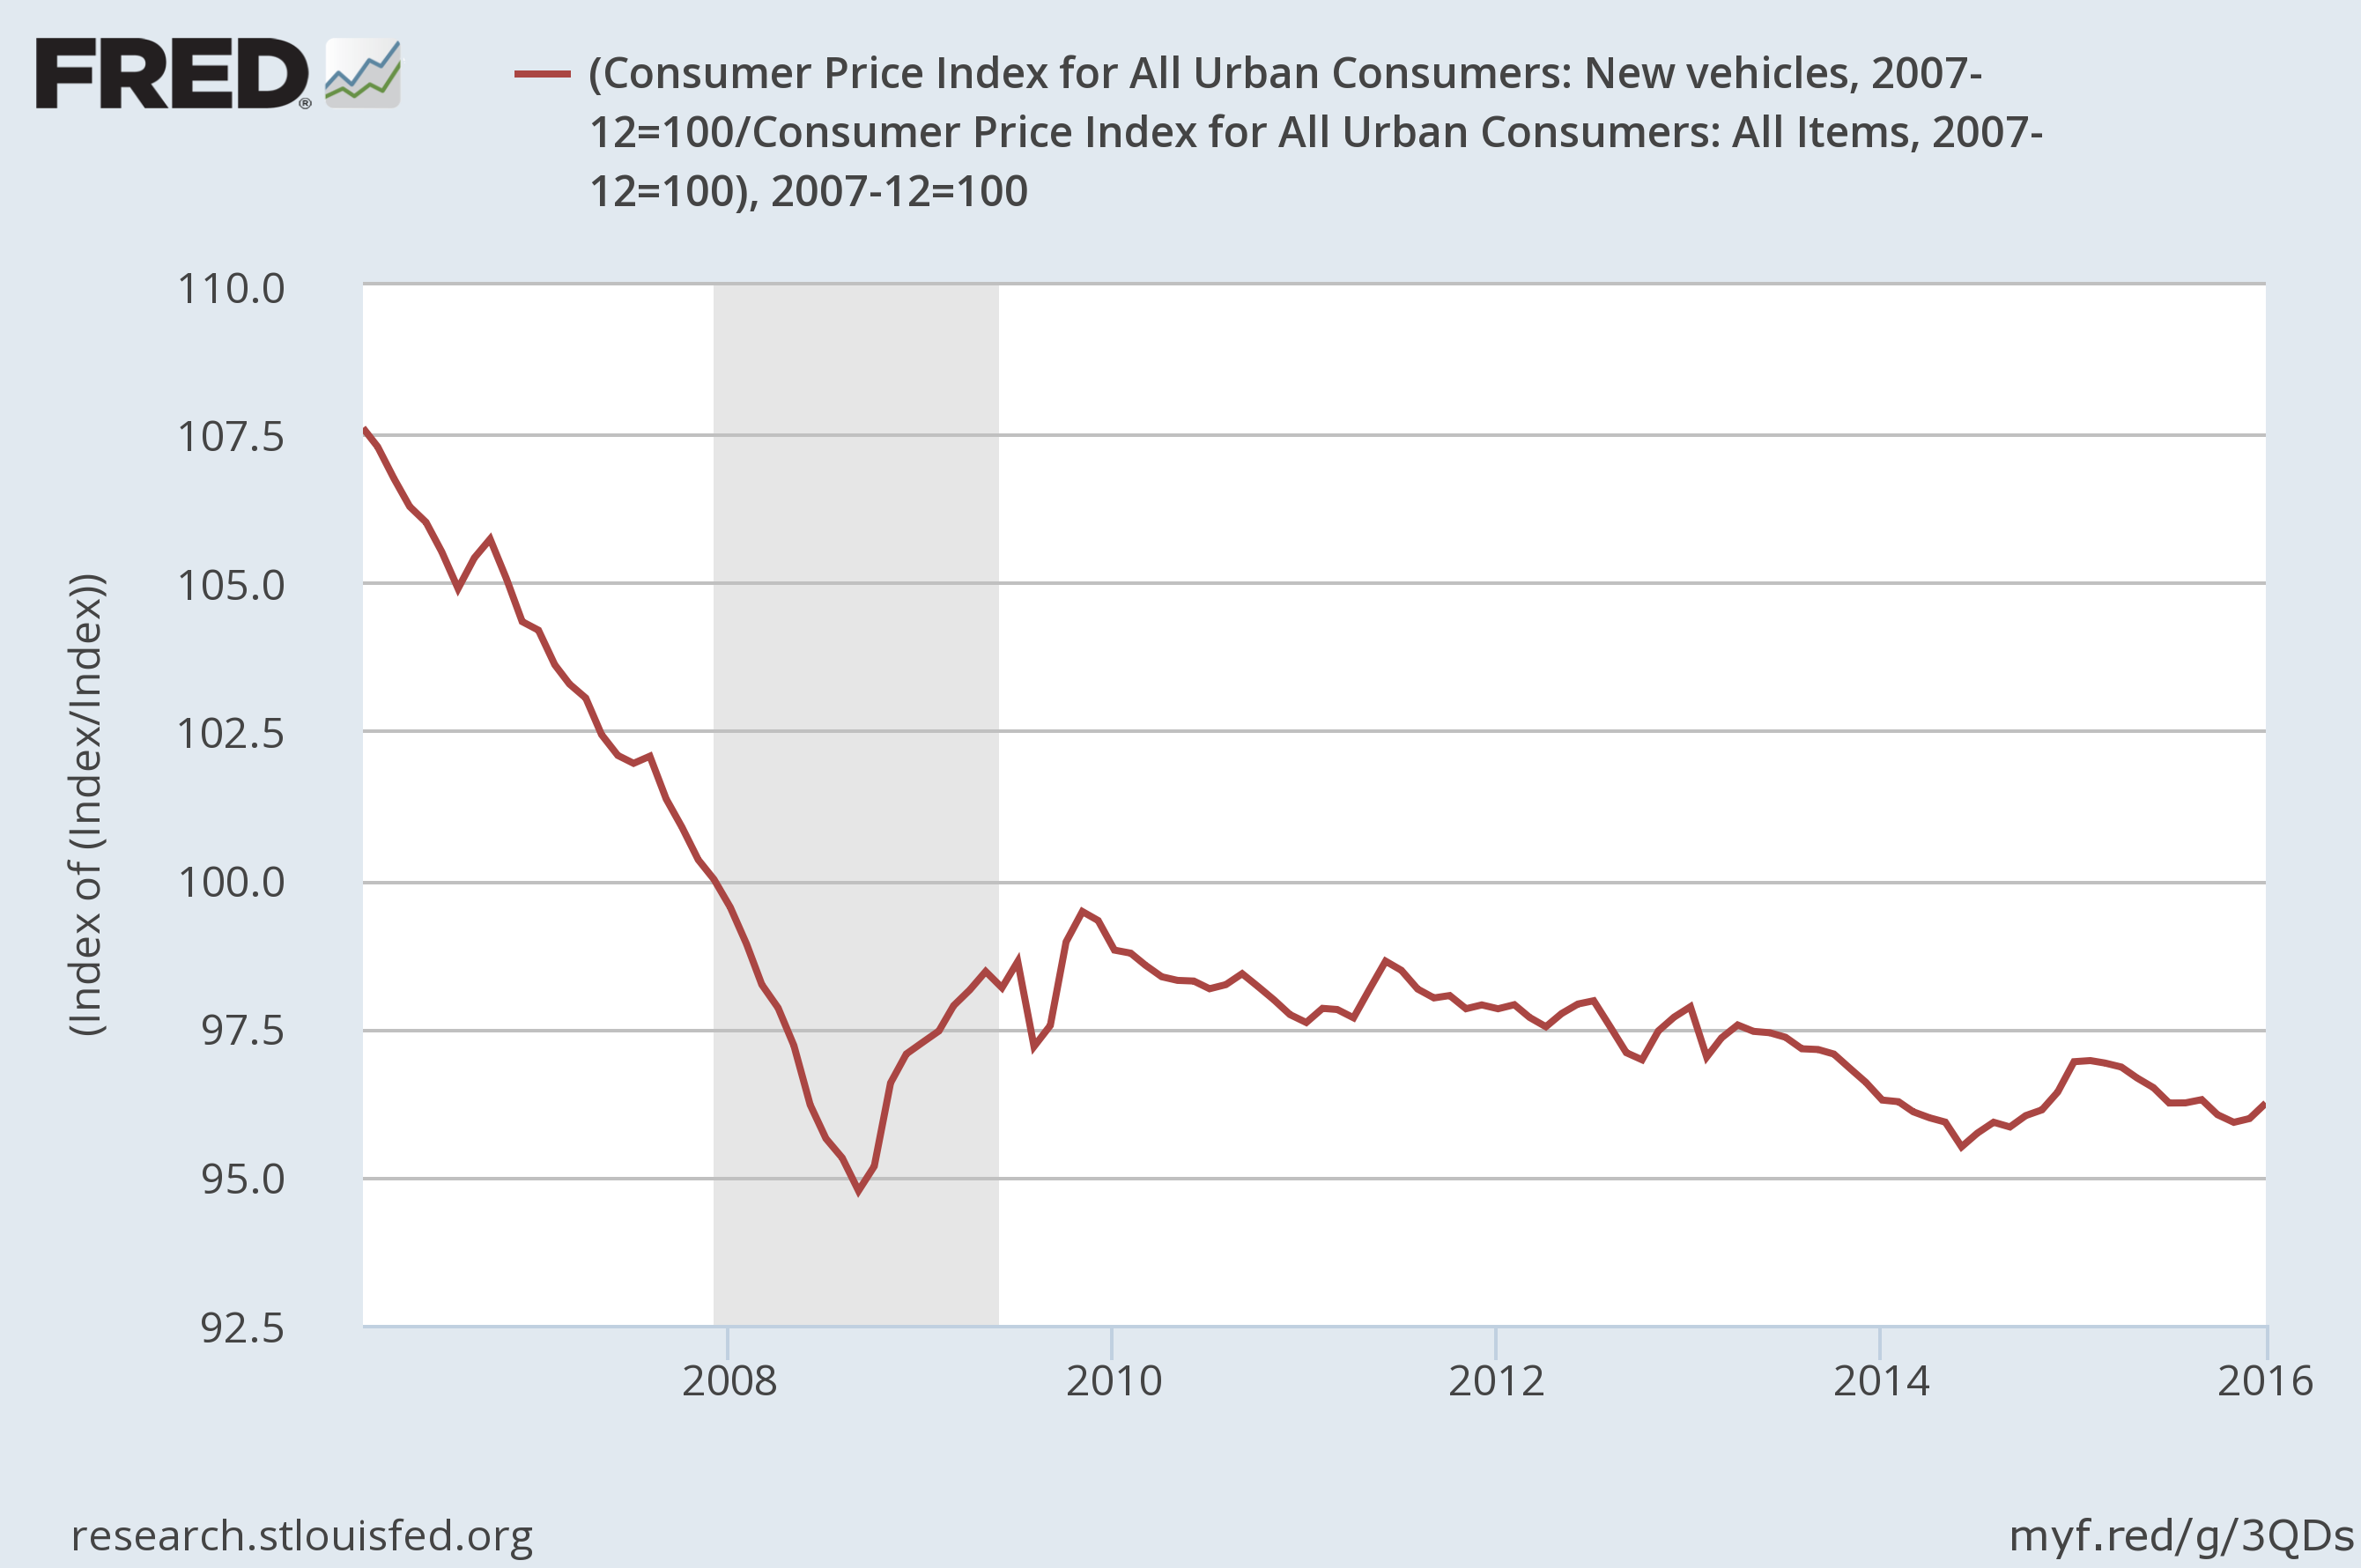 New Vehicle Price Index (inflation corrected)